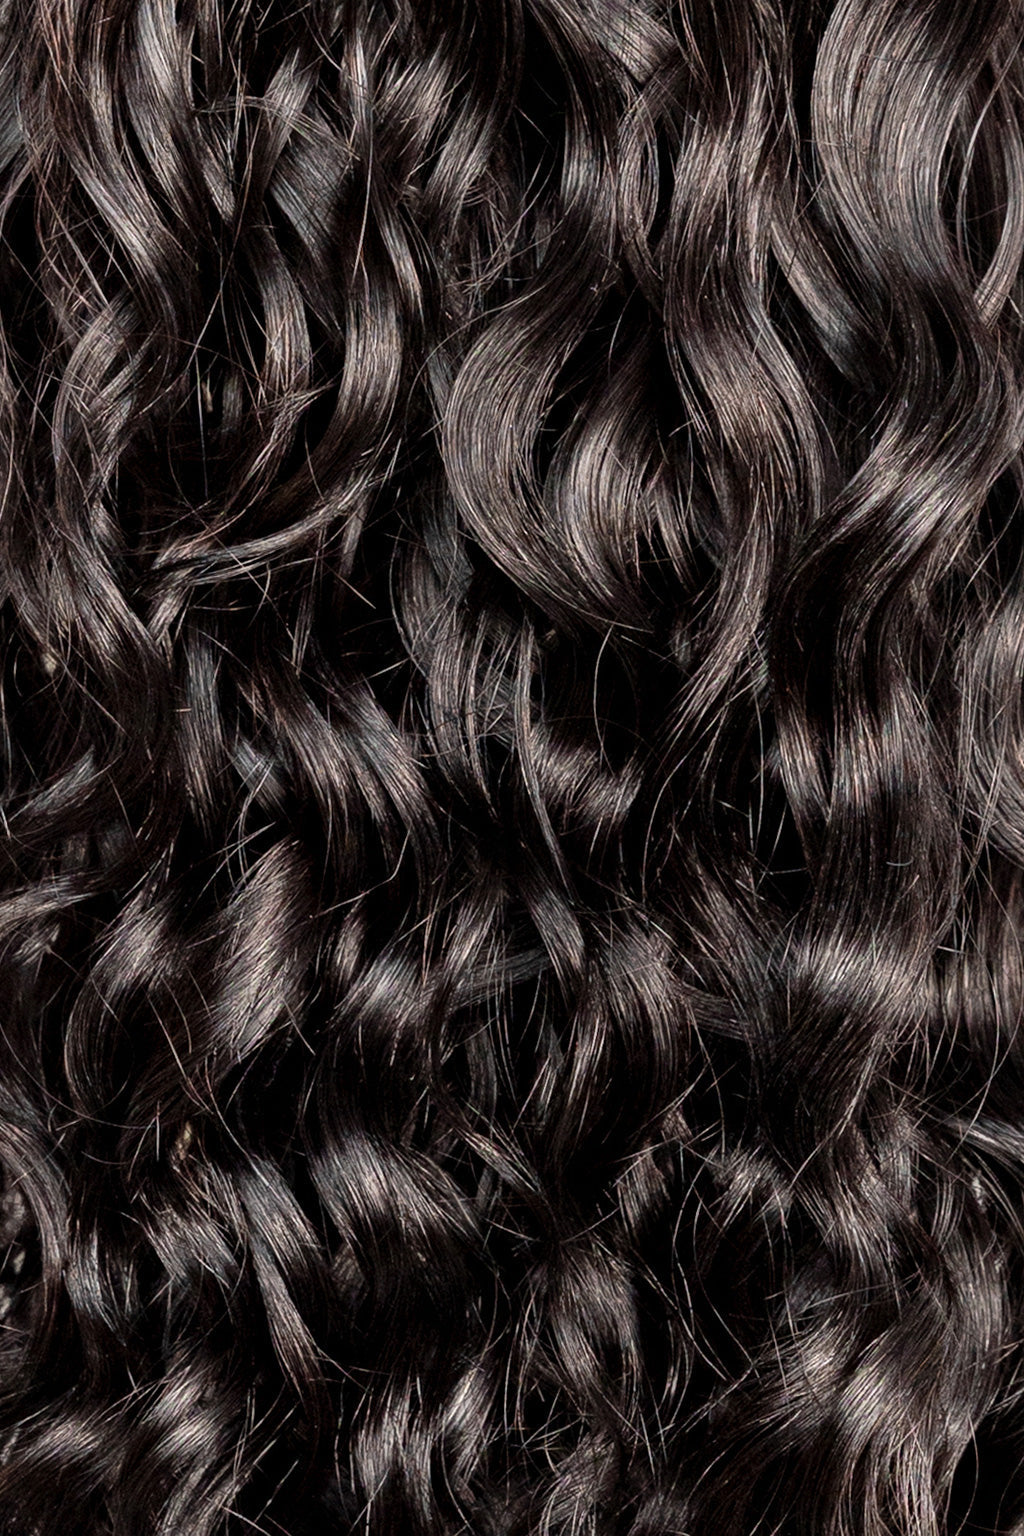 Natural Black Spiral Clip-In Hair Extensions